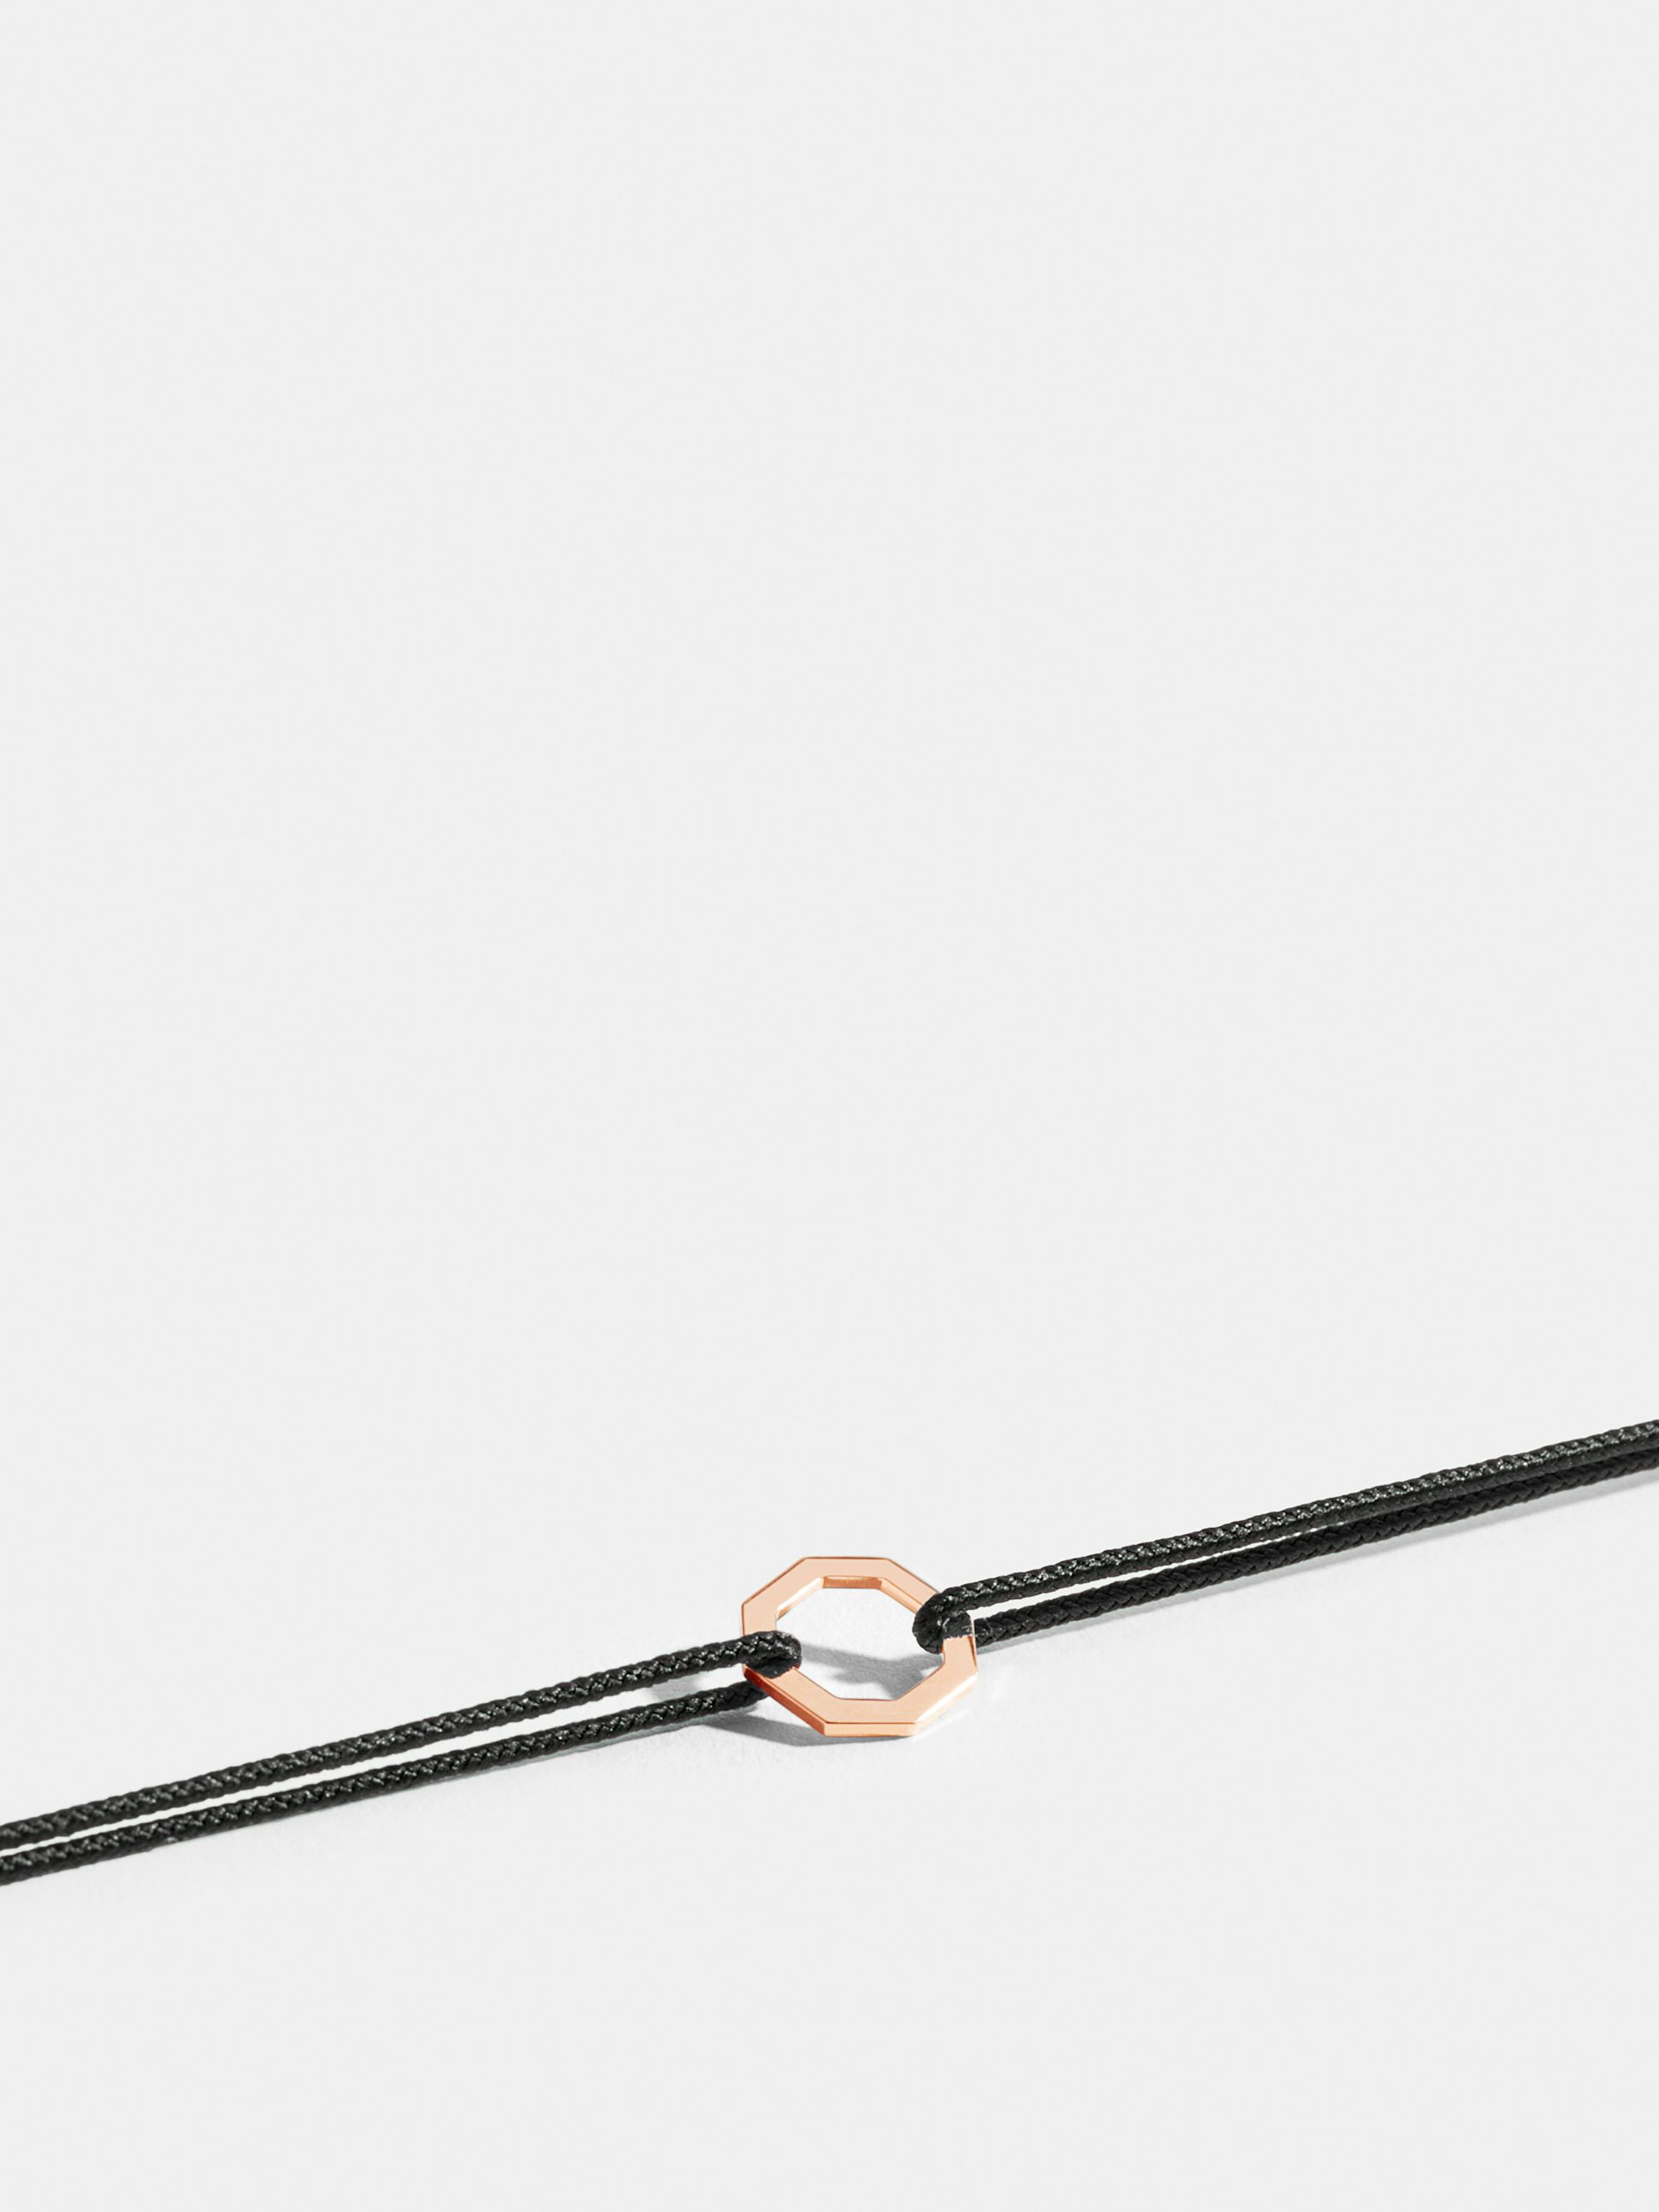 Octogone motif in 18k Fairmined ethical rose gold, on a black cord. 